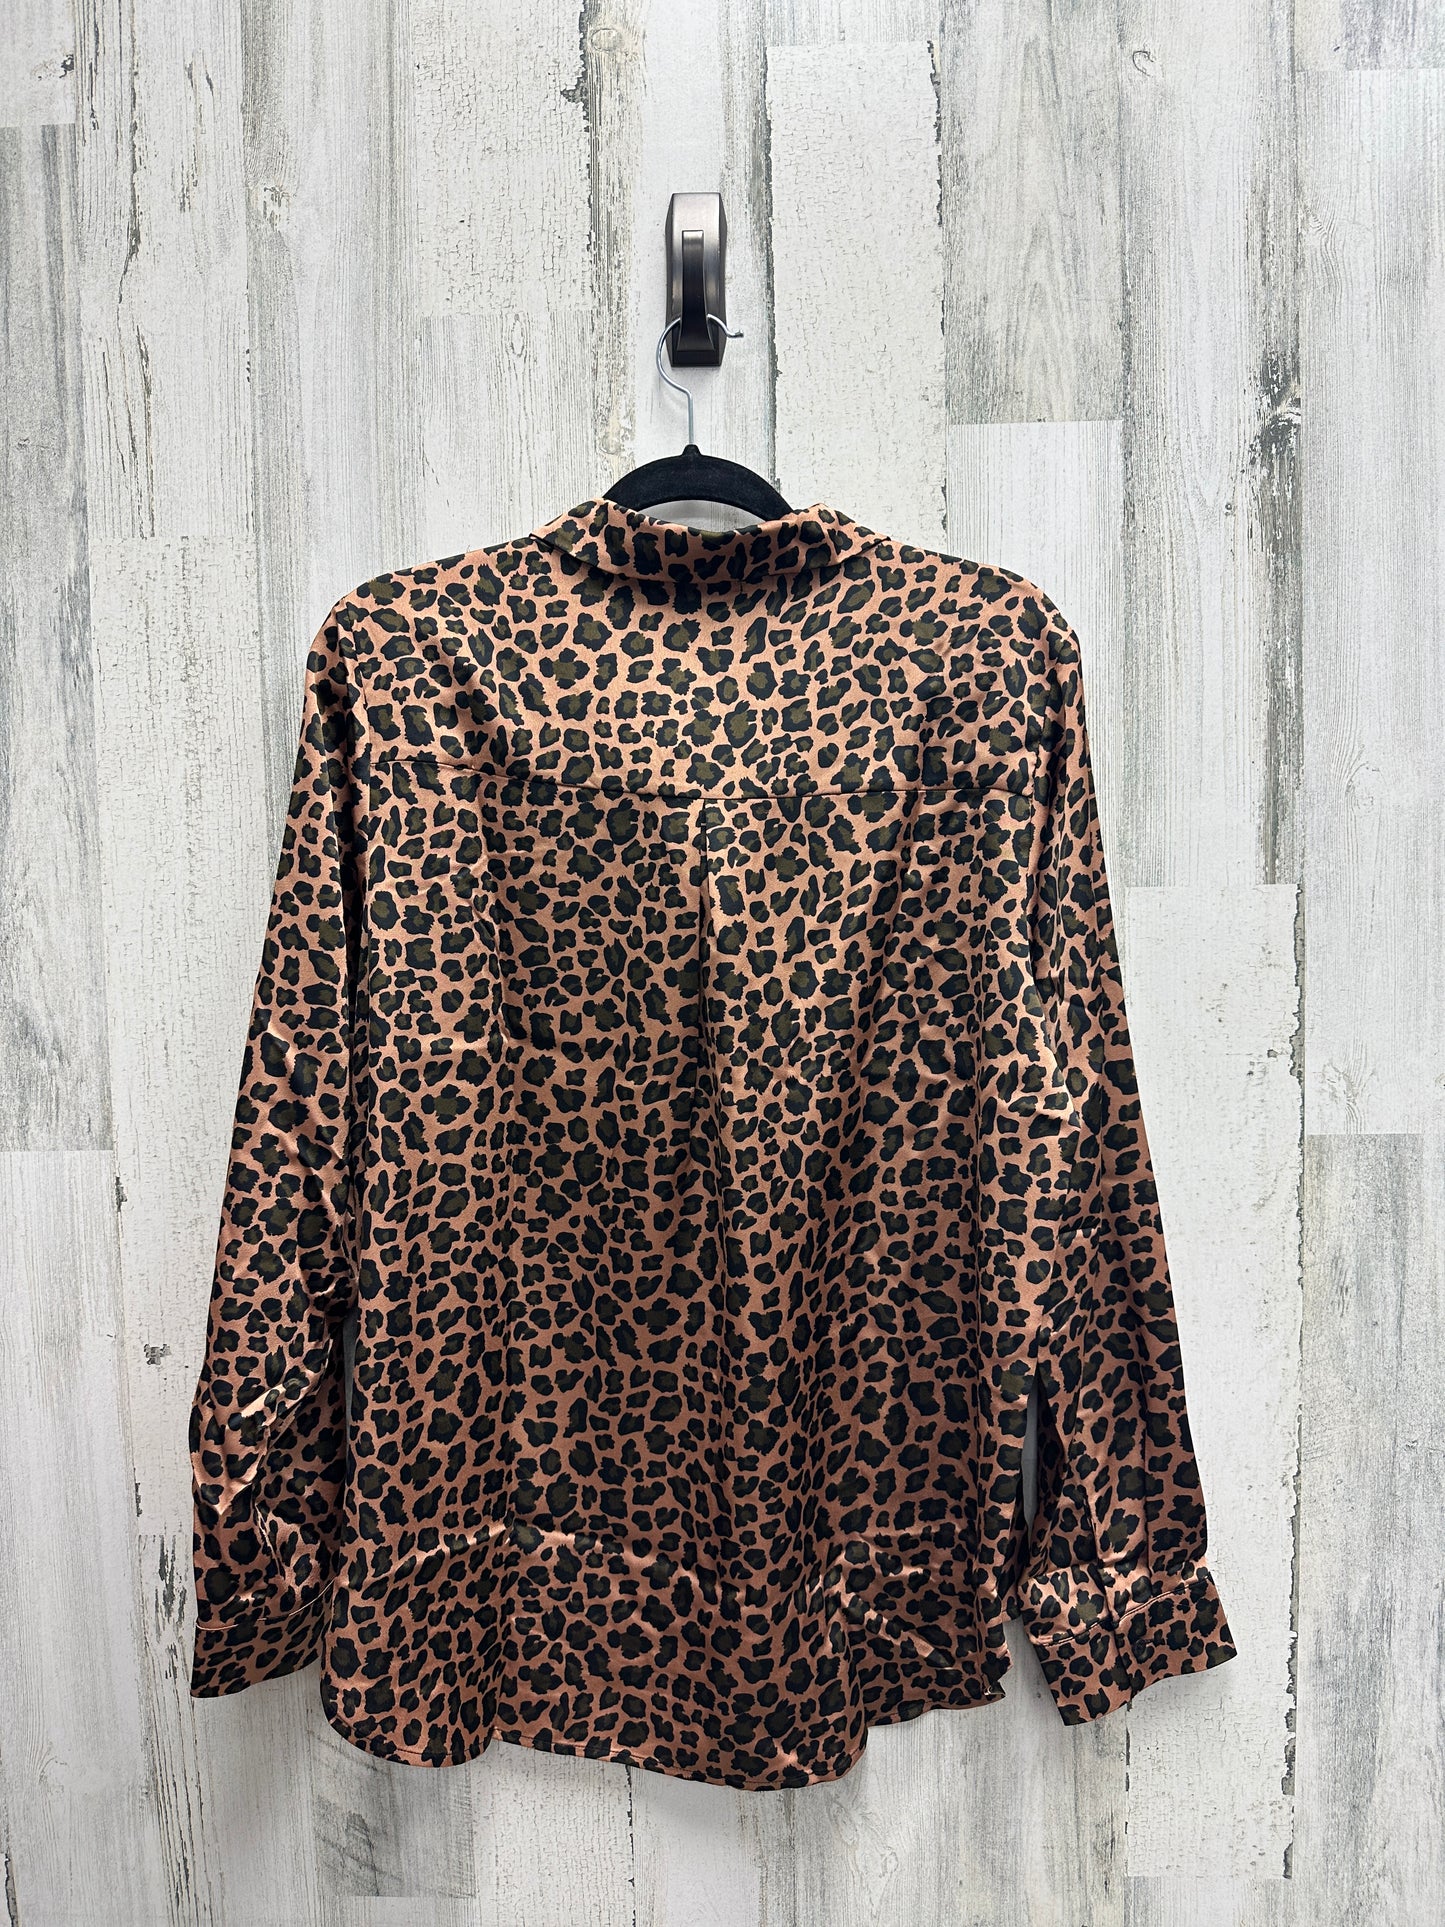 Top Long Sleeve By Pleione  Size: Xl